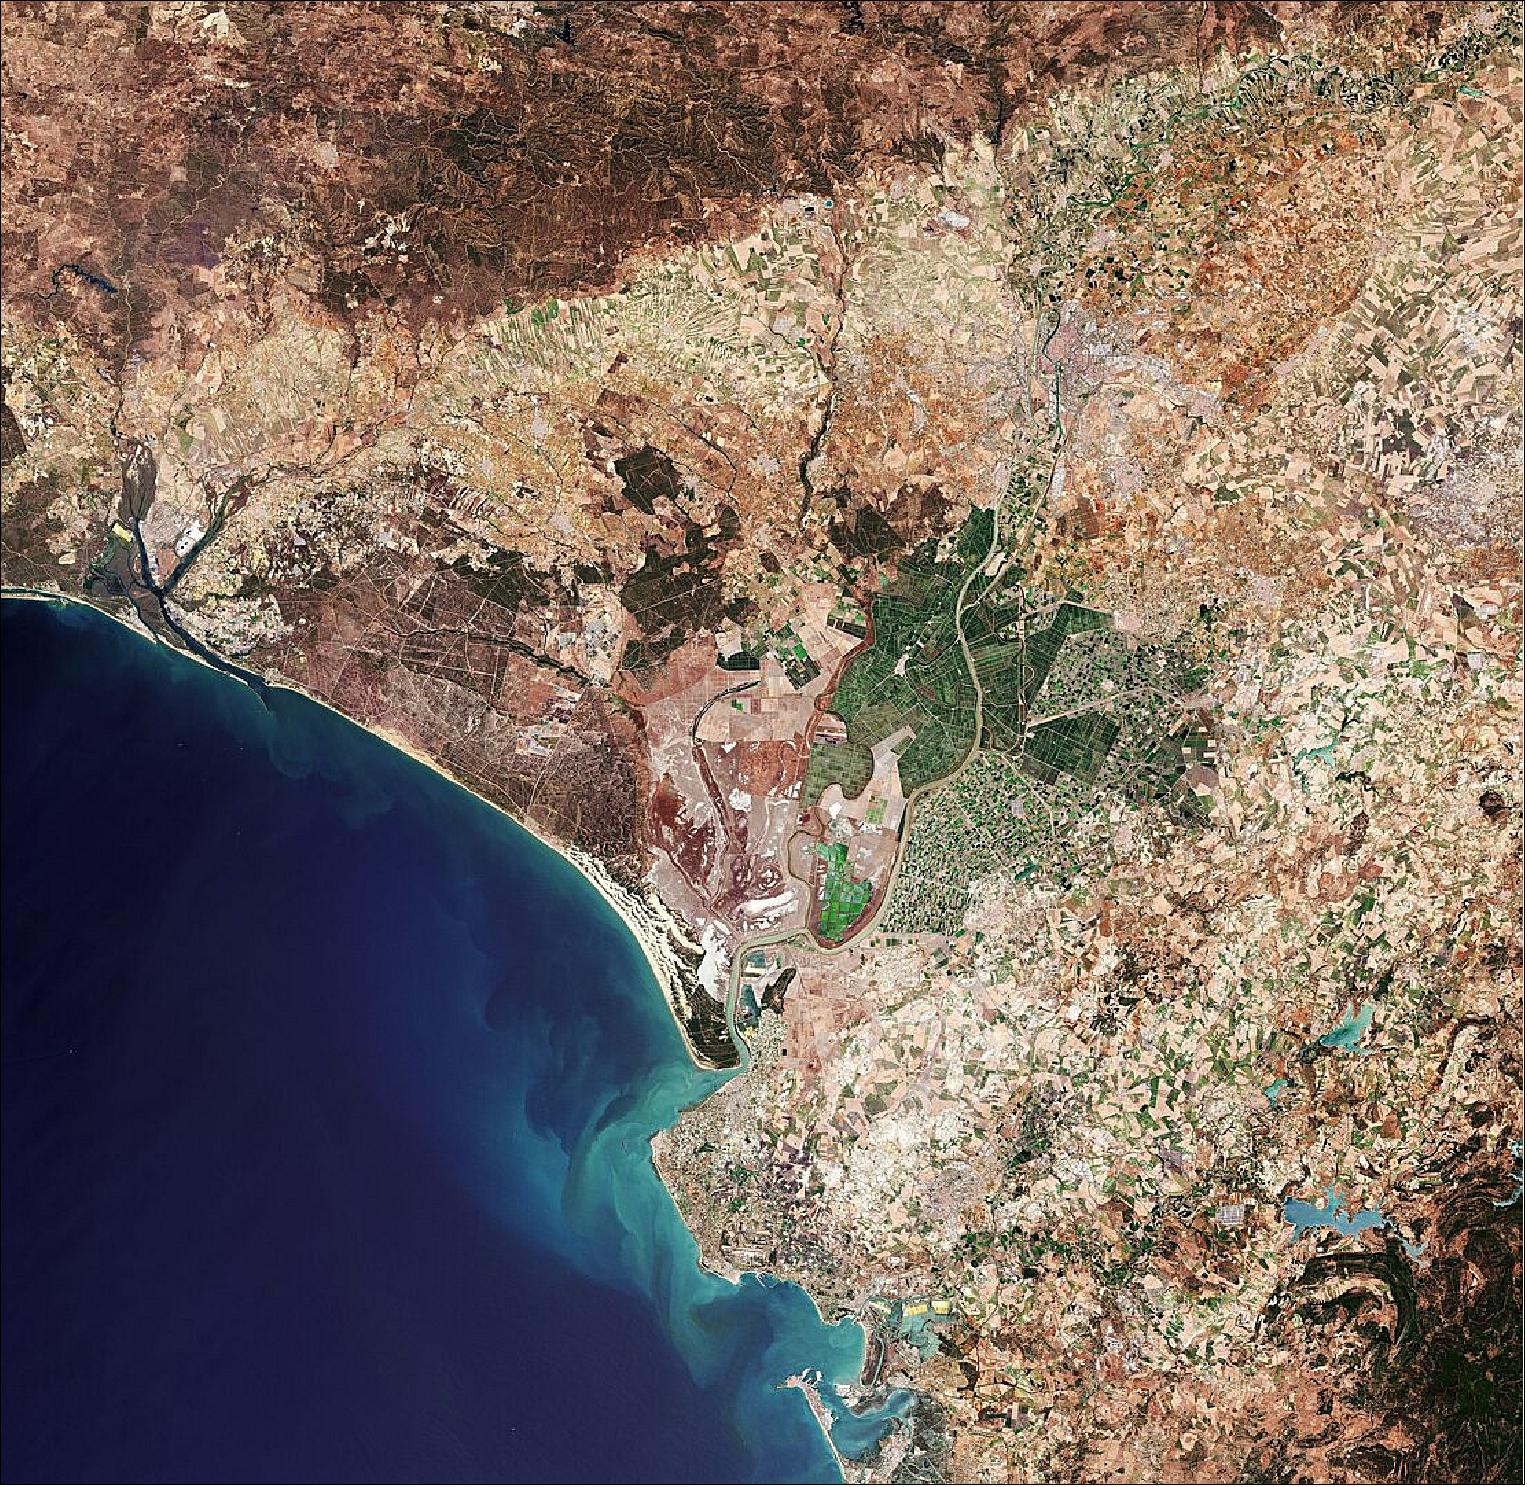 Figure 5: Seville, visible towards the top right of this image, is the capital of Andalusia and the fourth largest city in Spain. An inland port, it lies on the Guadalquivir River and while the original course of the river is visible snaking through the city on the right, we can see where water has also been redirected into a straighter course on the left. At over 650 km long, the Guadalquivir is one of the longest rivers in Spain, extending way beyond the frame of this image. Nevertheless, it can be seen winding its course all the way from the top right of the image, just south of the Sierra Norte mountain range, to the Gulf of Cádiz where it empties into the Atlantic Ocean. On route, this major river serves as a source for irrigation – here noticeable in the top right of the image, but mainly to the south of Seville where large green agricultural fields appear in sharp contrast to the surrounding drier brown land. This image, captured on 21 June 2019 with Sentinel-2, is also featured on the Earth from Space video program (image credit: ESA, the image contains modified Copernicus Sentinel data (2019), processed by ESA, CC BY-SA 3.0 IGO)